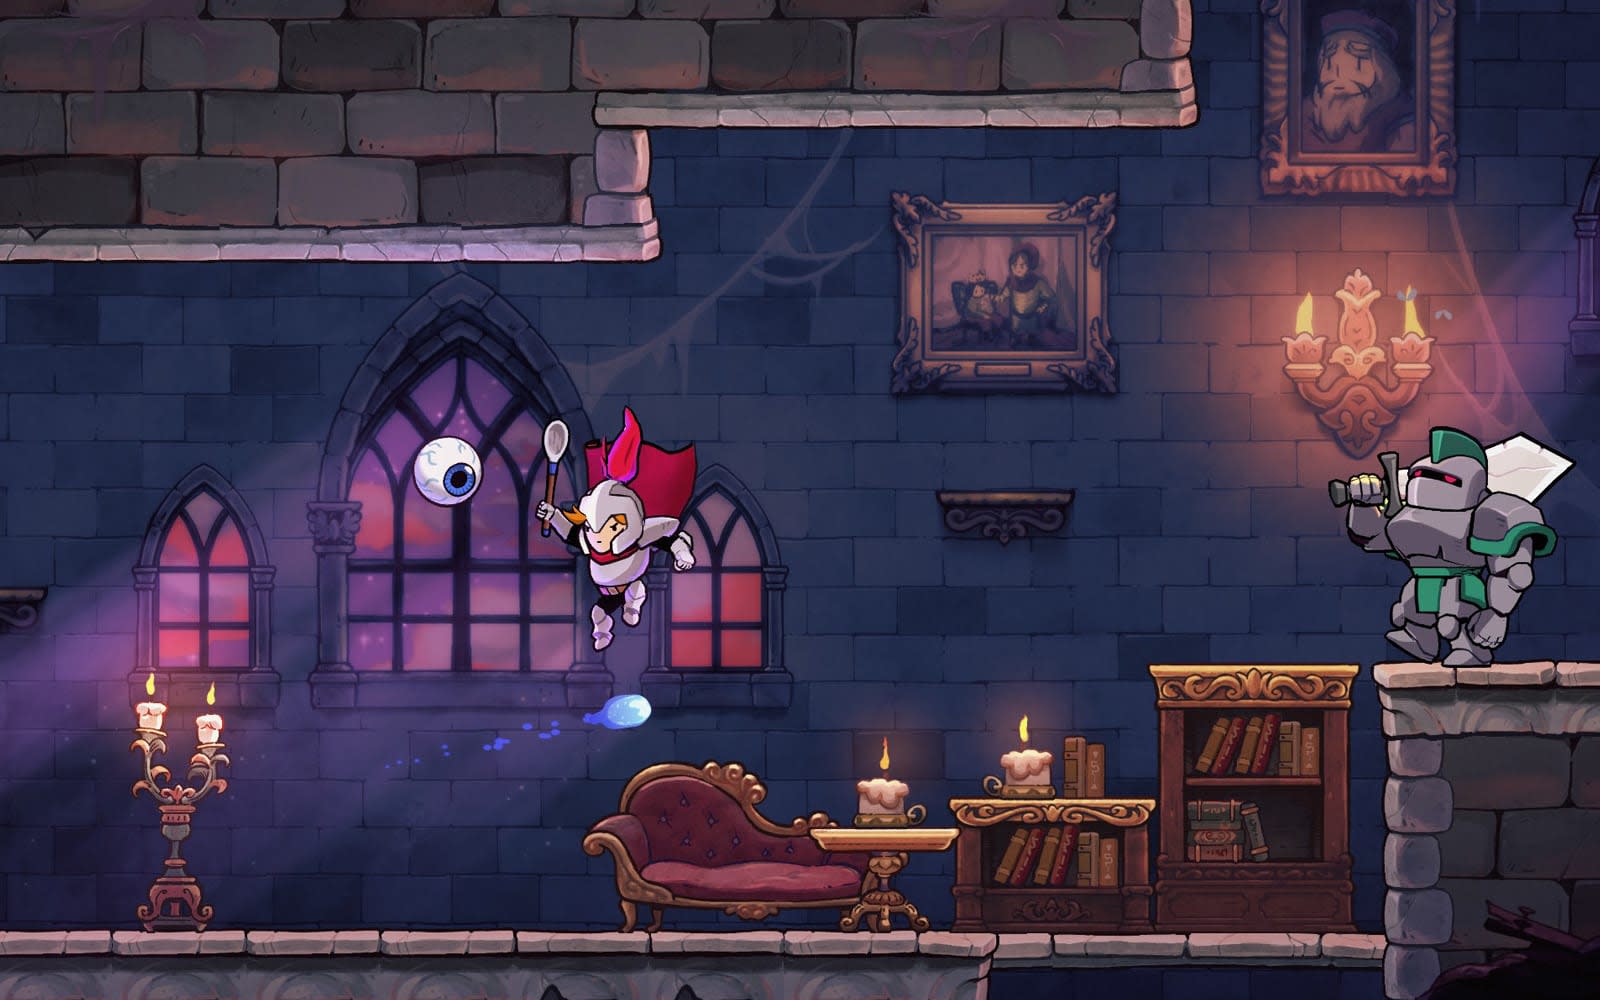 A Sequel To Beloved Indie Game Rogue Legacy Is In The Works